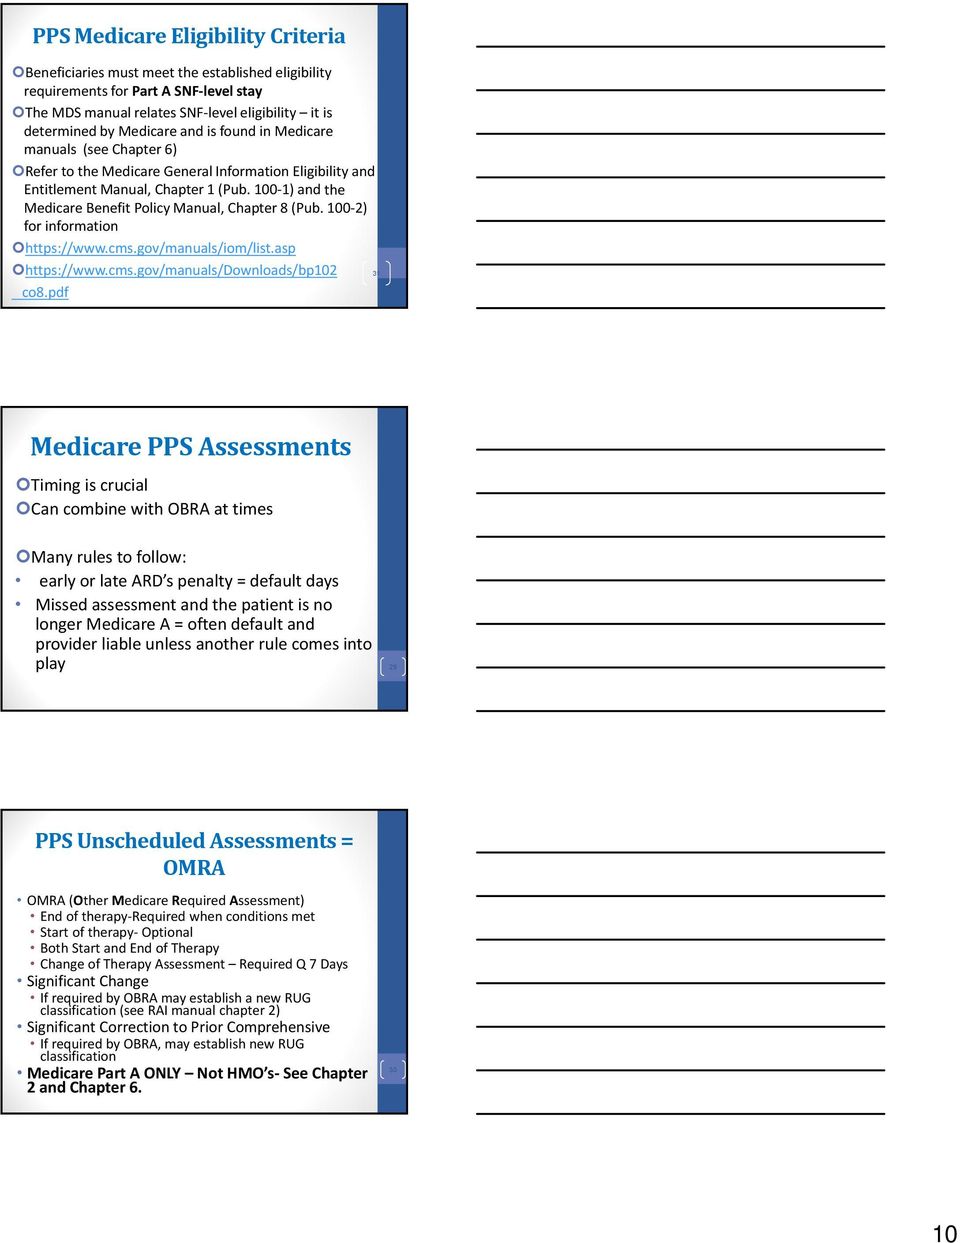 00 ) and the Medicare Benefit Policy Manual, Chapter 8 (Pub. 00 ) for information https://www.cms.gov/manuals/iom/list.asp https://www.cms.gov/manuals/downloads/bp0 co8.